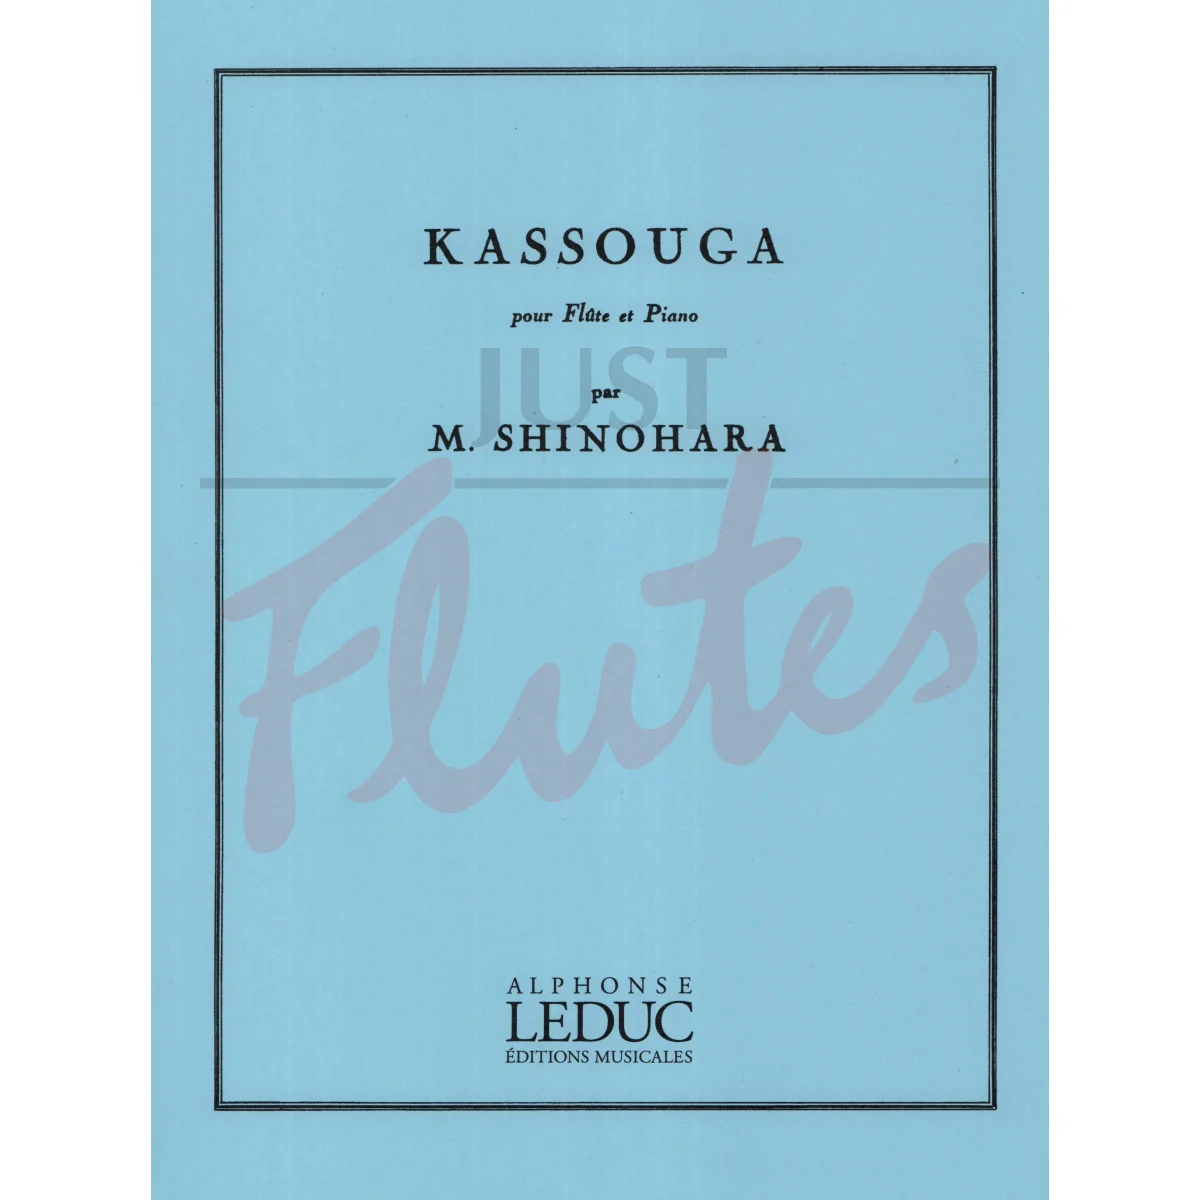 Kassouga for Flute and Piano